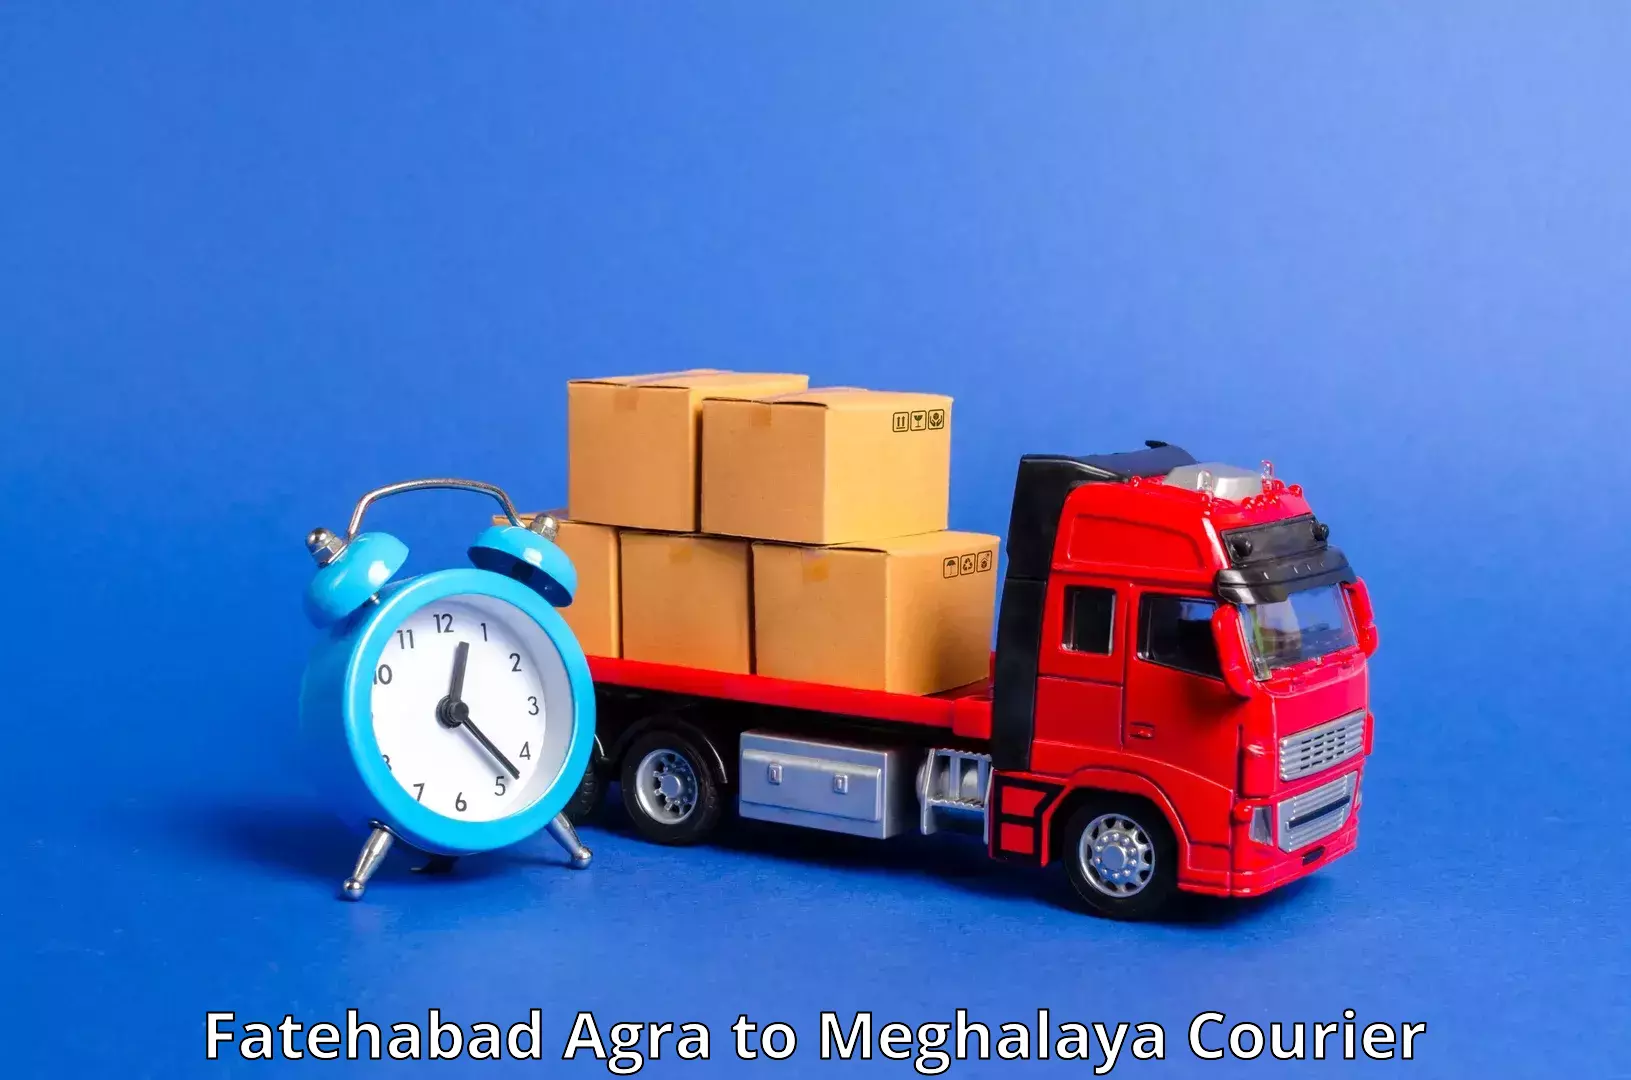 Delivery service partnership Fatehabad Agra to Shillong